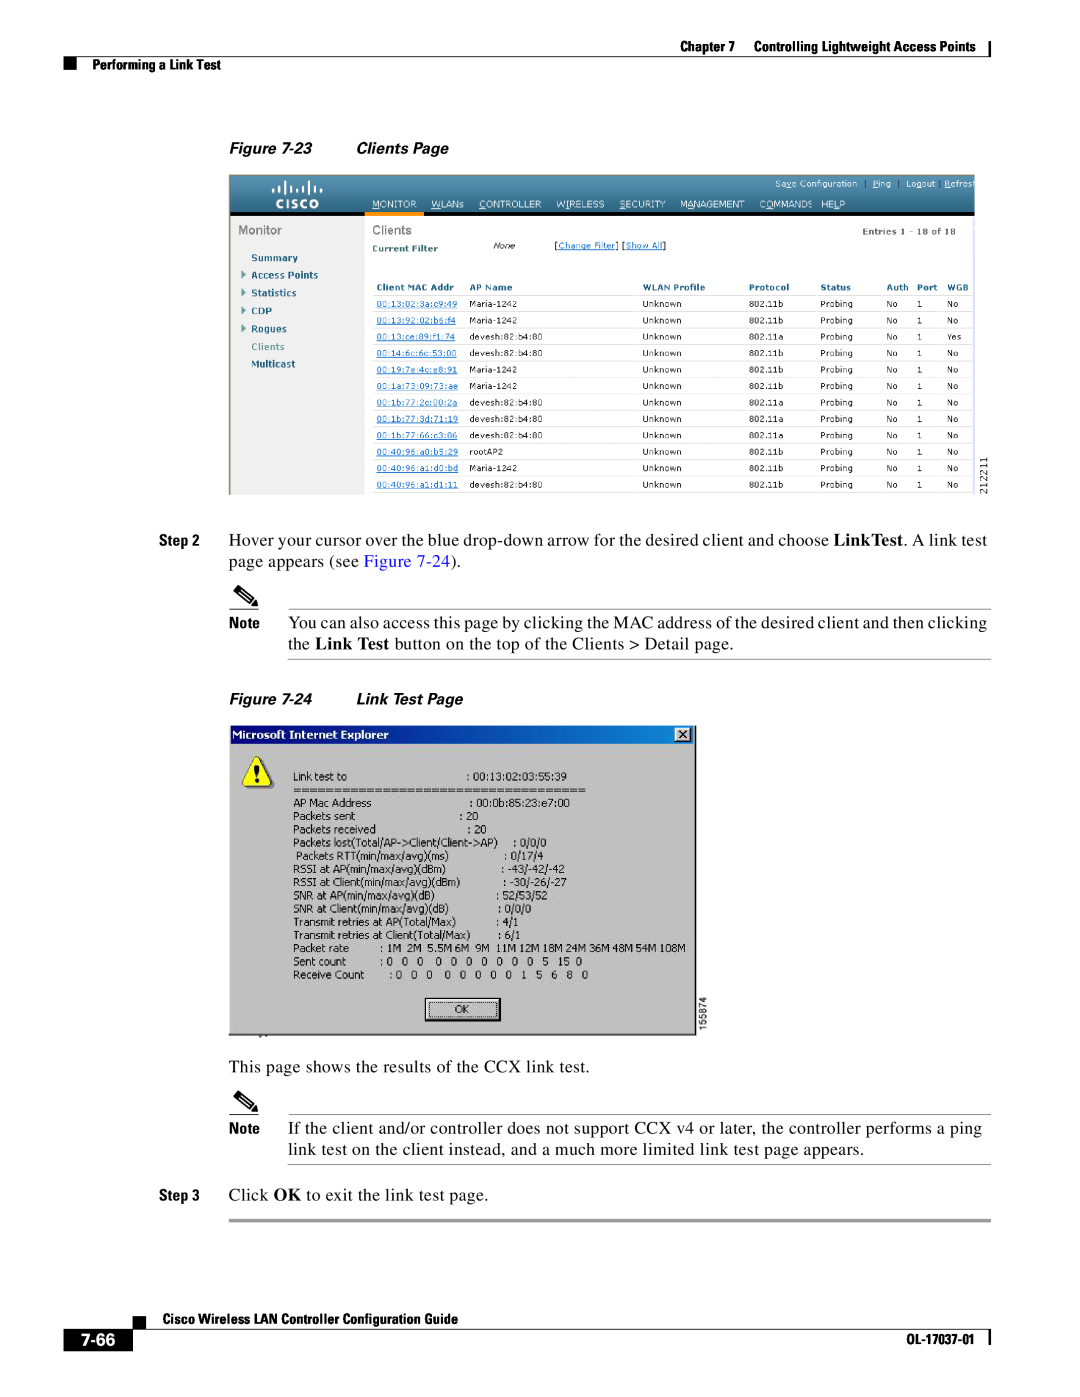 Cisco Systems OL-17037-01 manual 7-66, This page shows the results of the CCX link test 